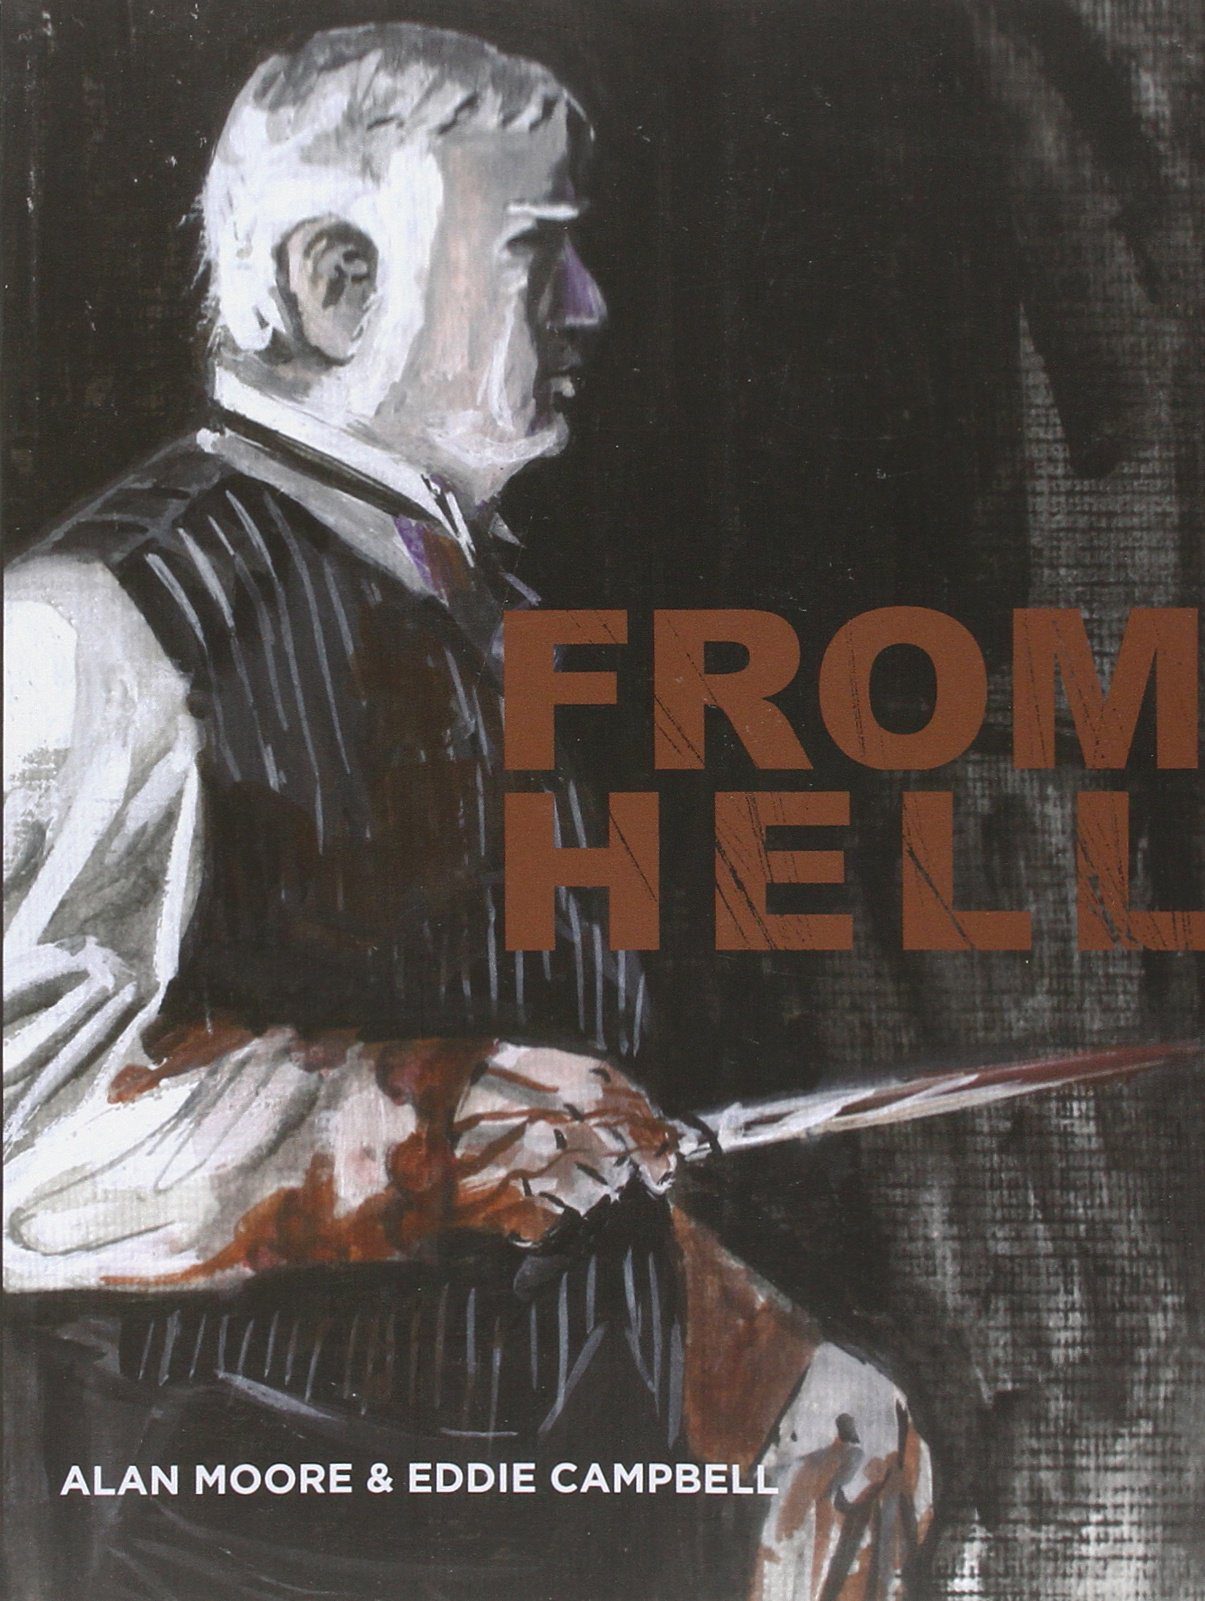 From Hell book cover